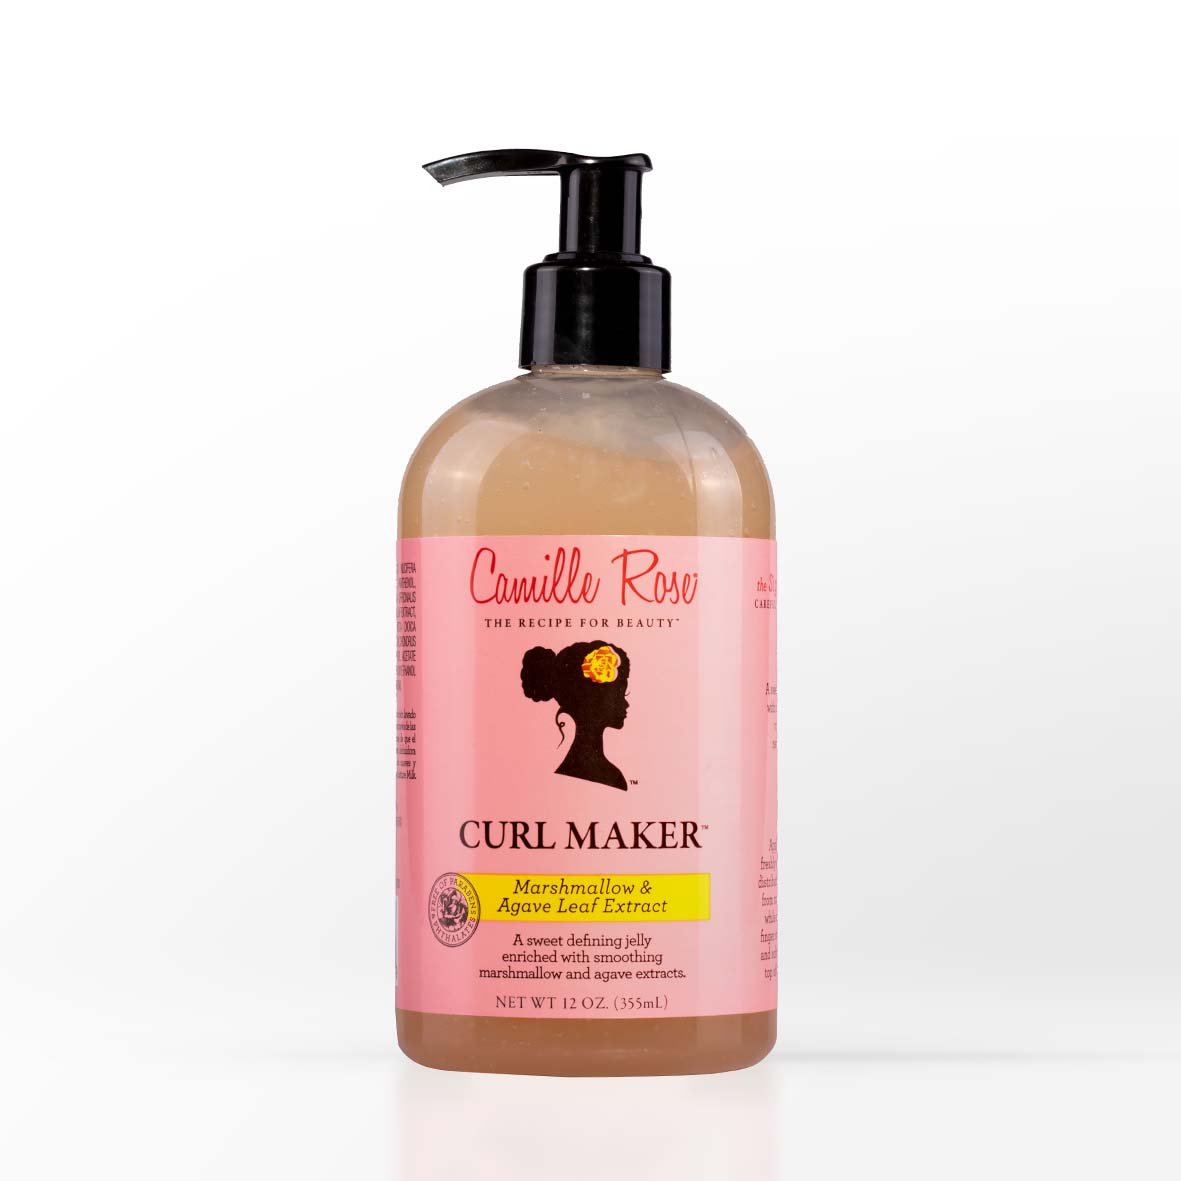 CAMILLE ROSE CURL MAKER MARSHMALLOW & AGAVE LEAF EXTRACT